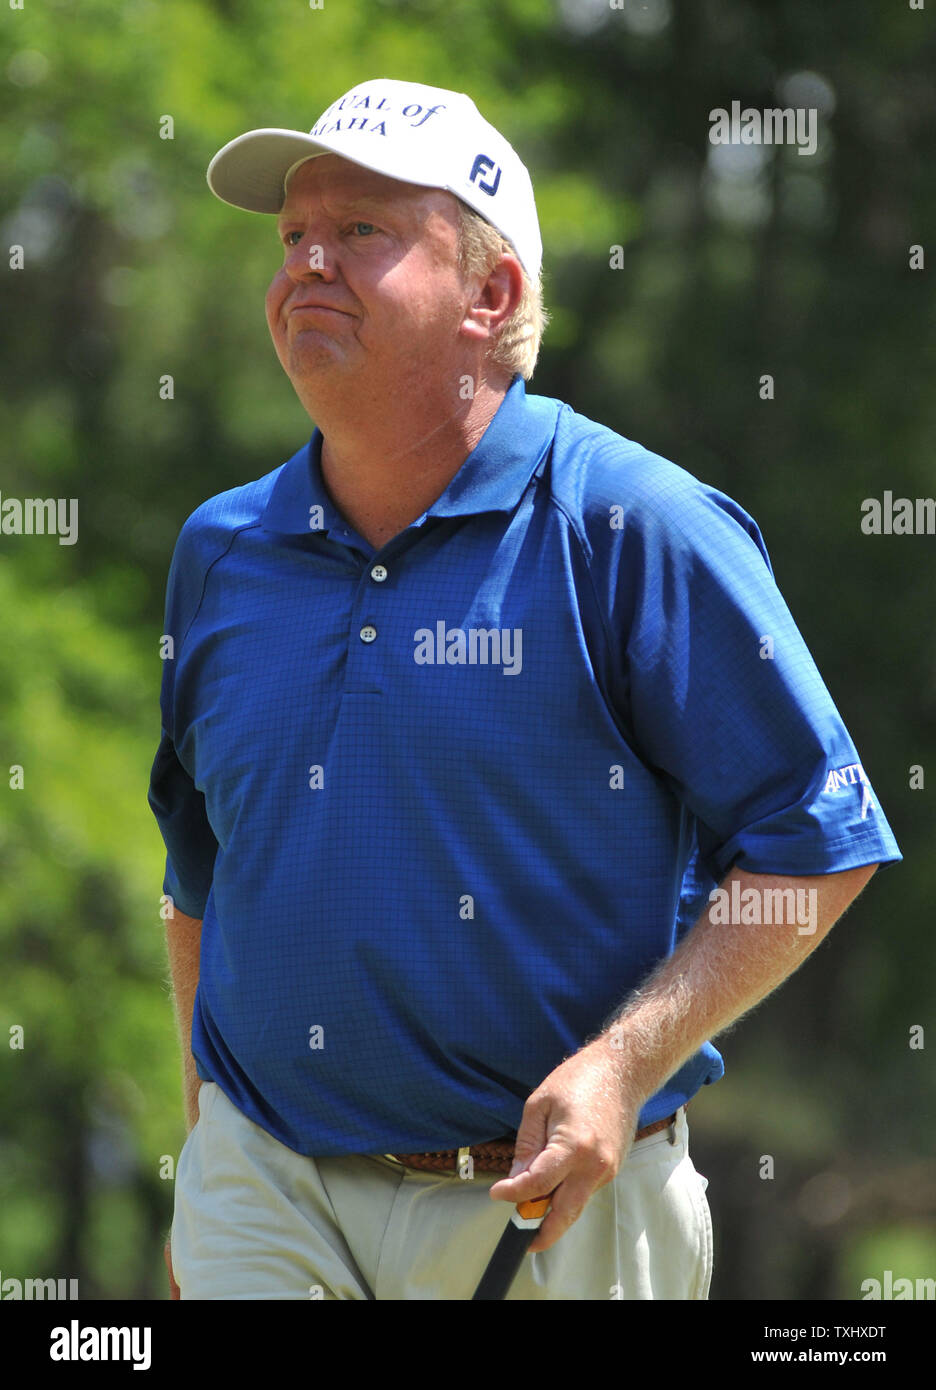 Billy Mayfield walks off of the 3rd green during the fourth round of the Quail Hollow Tournament in Charlotte, North Carolina on May 2, 2010.   UPI/Kevin Dietsch Stock Photo